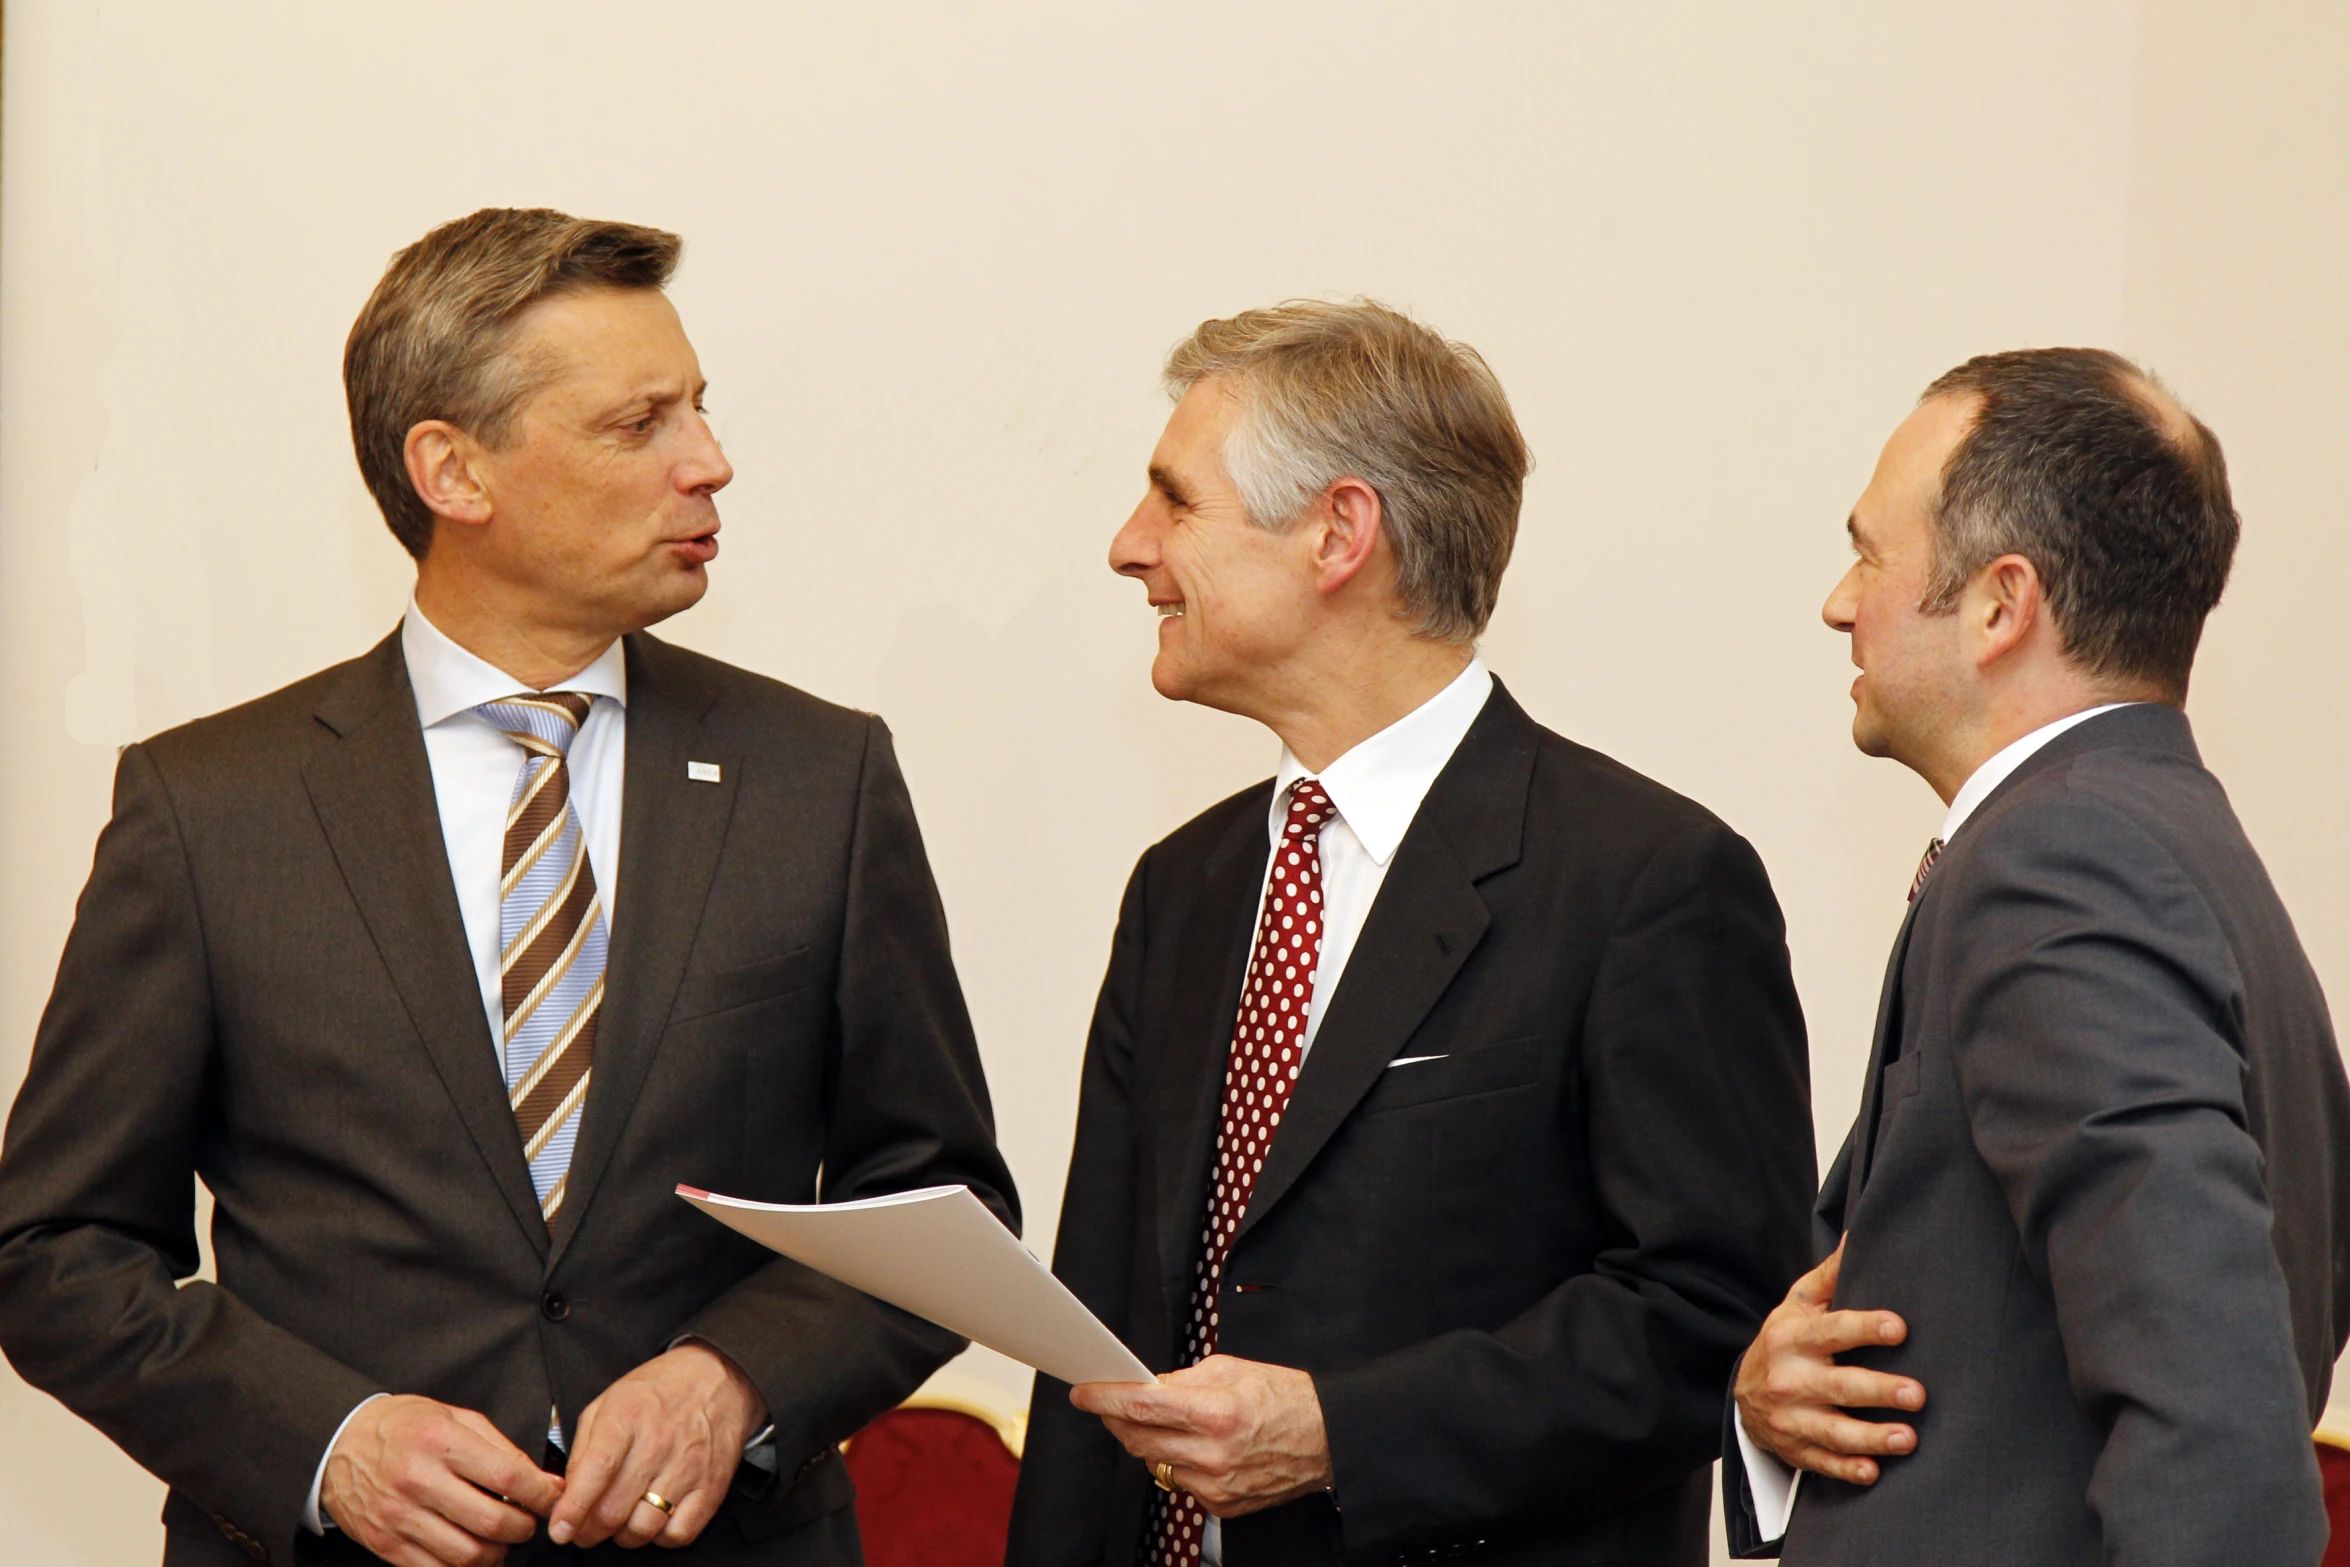 three men dressed in business attire stand in front of a wall